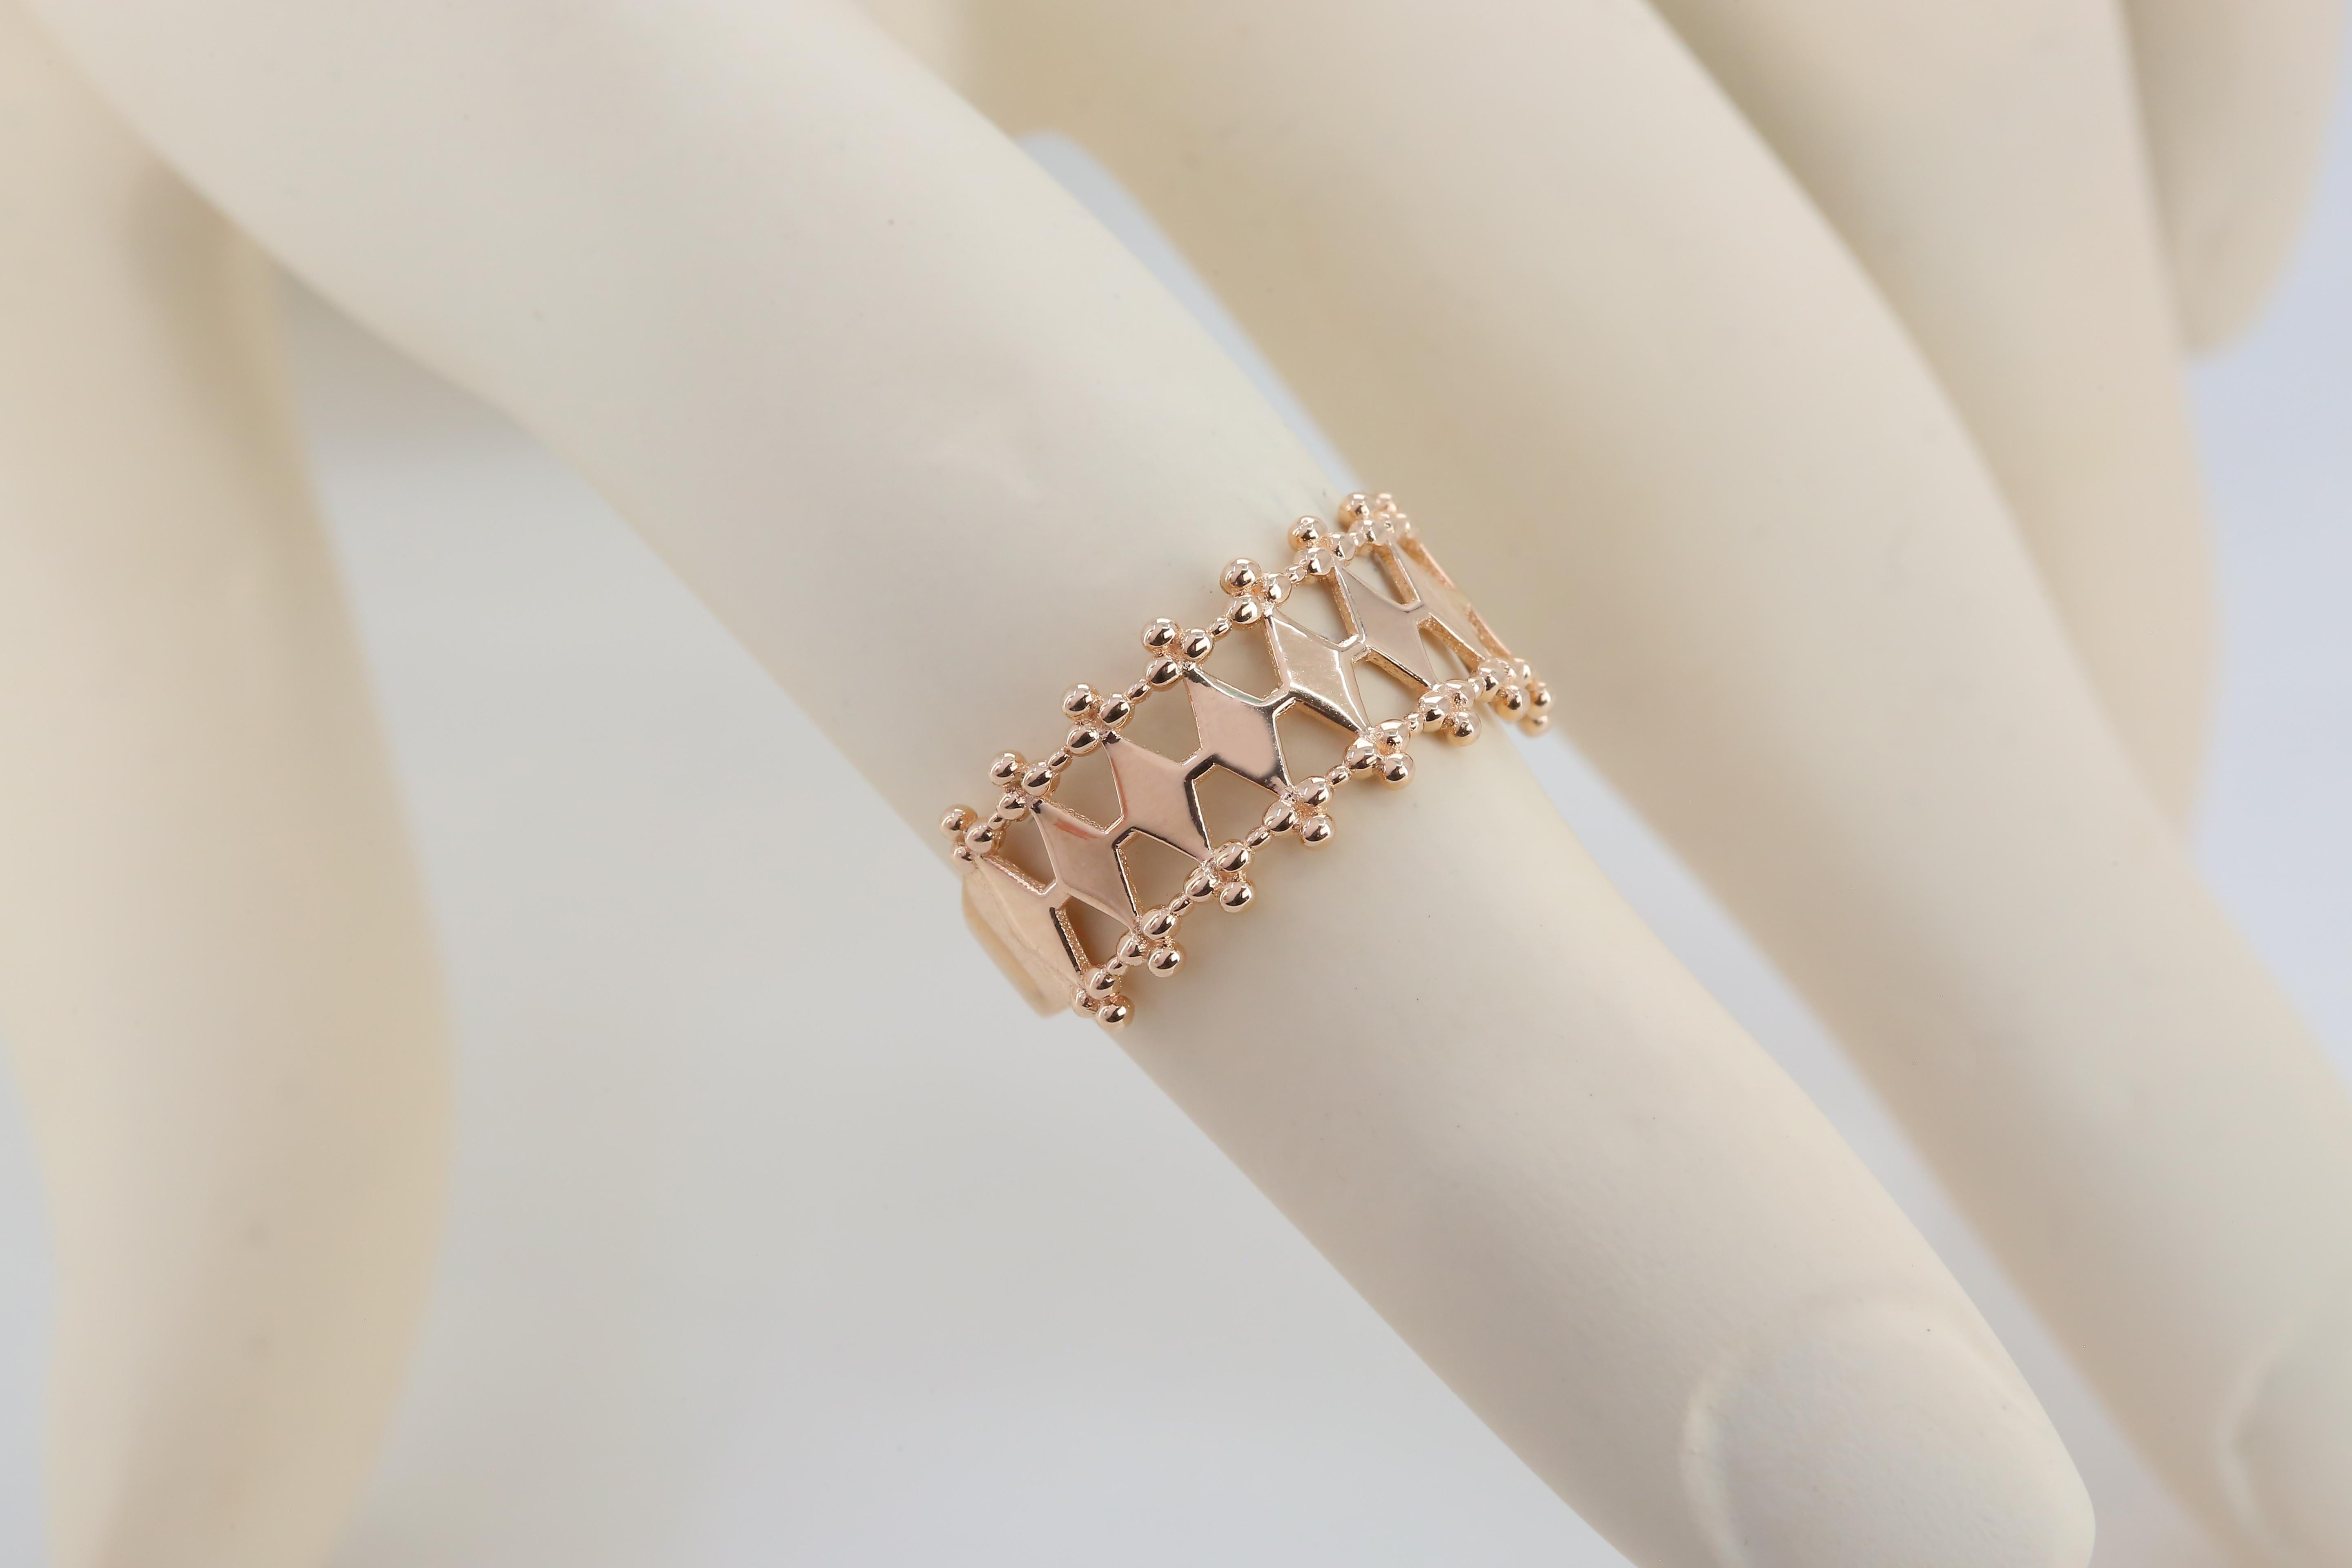 For Sale:  14k Gold Fence Ring, Dainty Fence Ring, 14k Gold Dainty Fence Shaped Ring, Fence 4